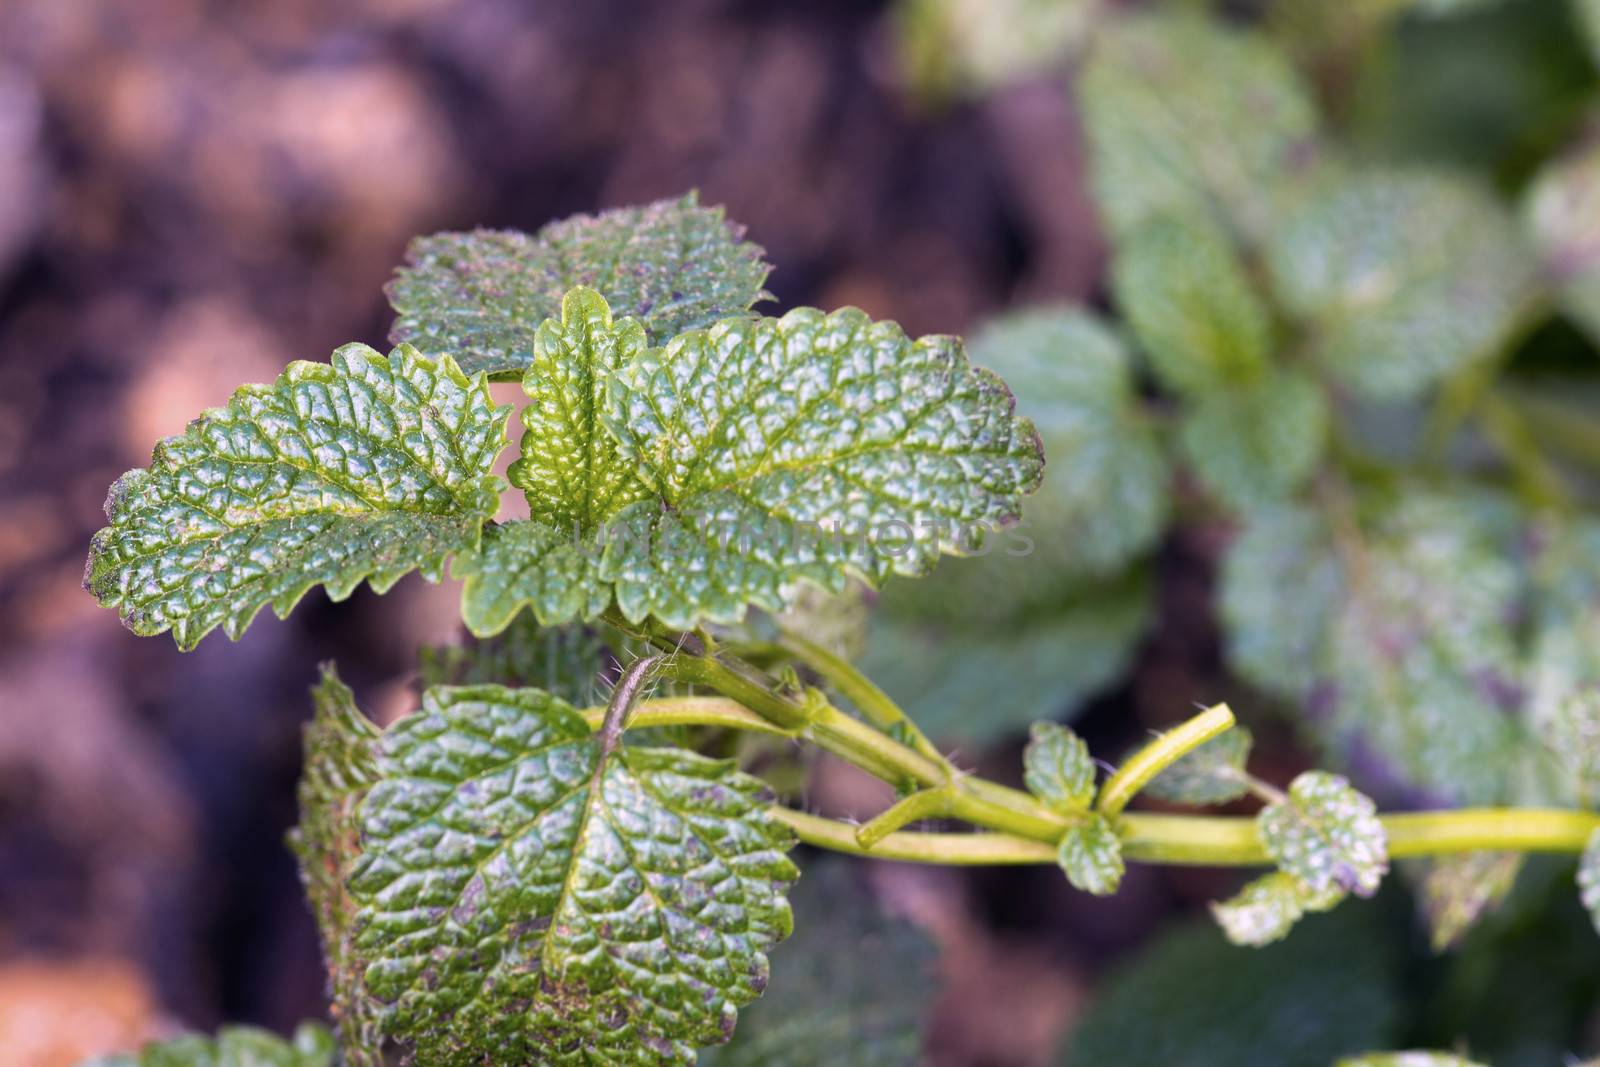 Closeup of Lemon Balm (Melissa officinalis) growing in a cultivated herb garden